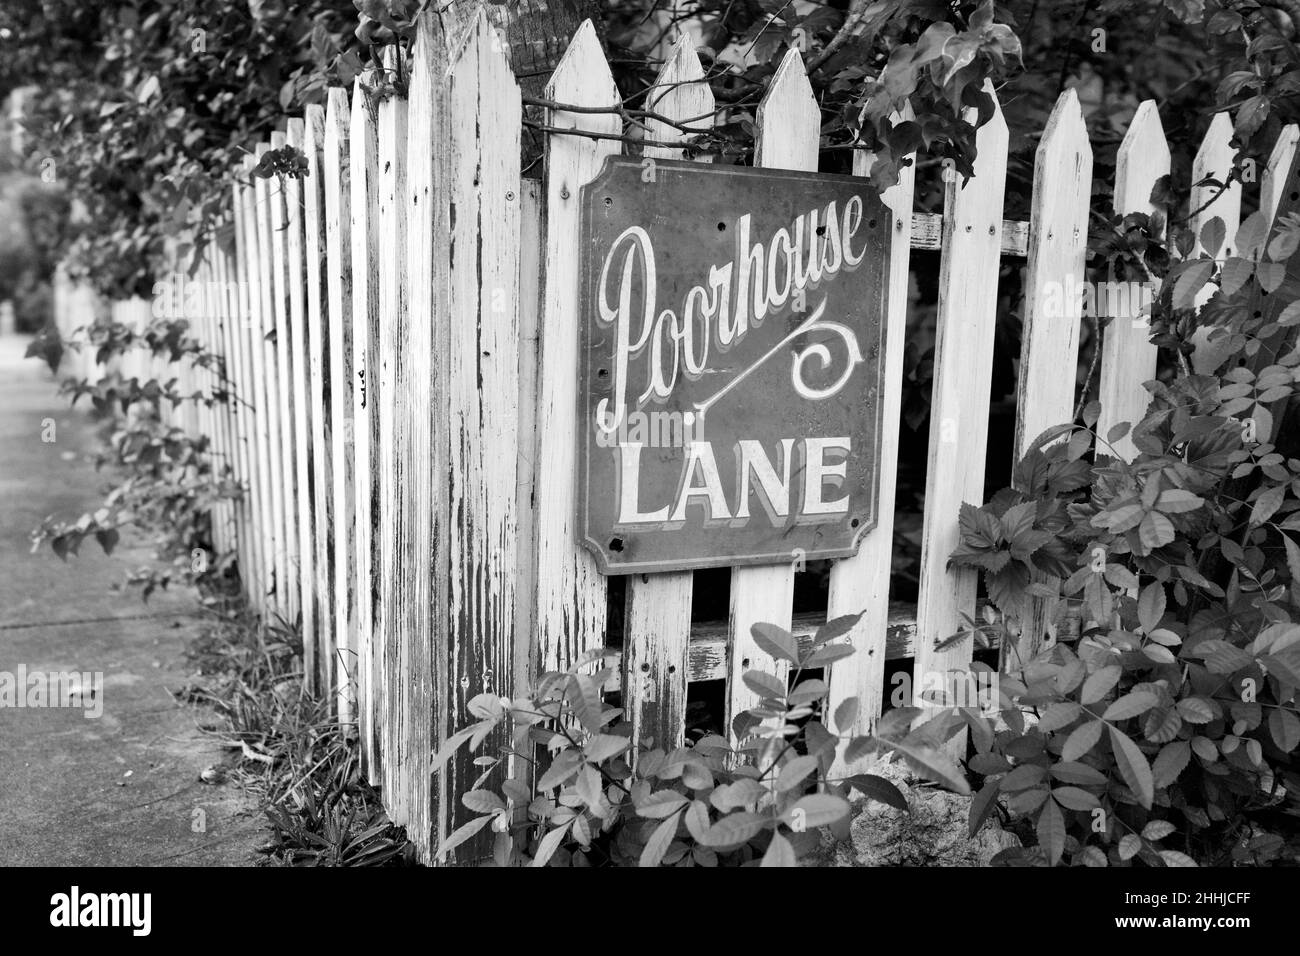 Poorhouse Lane sign on picket fence in Key West, Florida, FL USA. Island vacation destination. Stock Photo